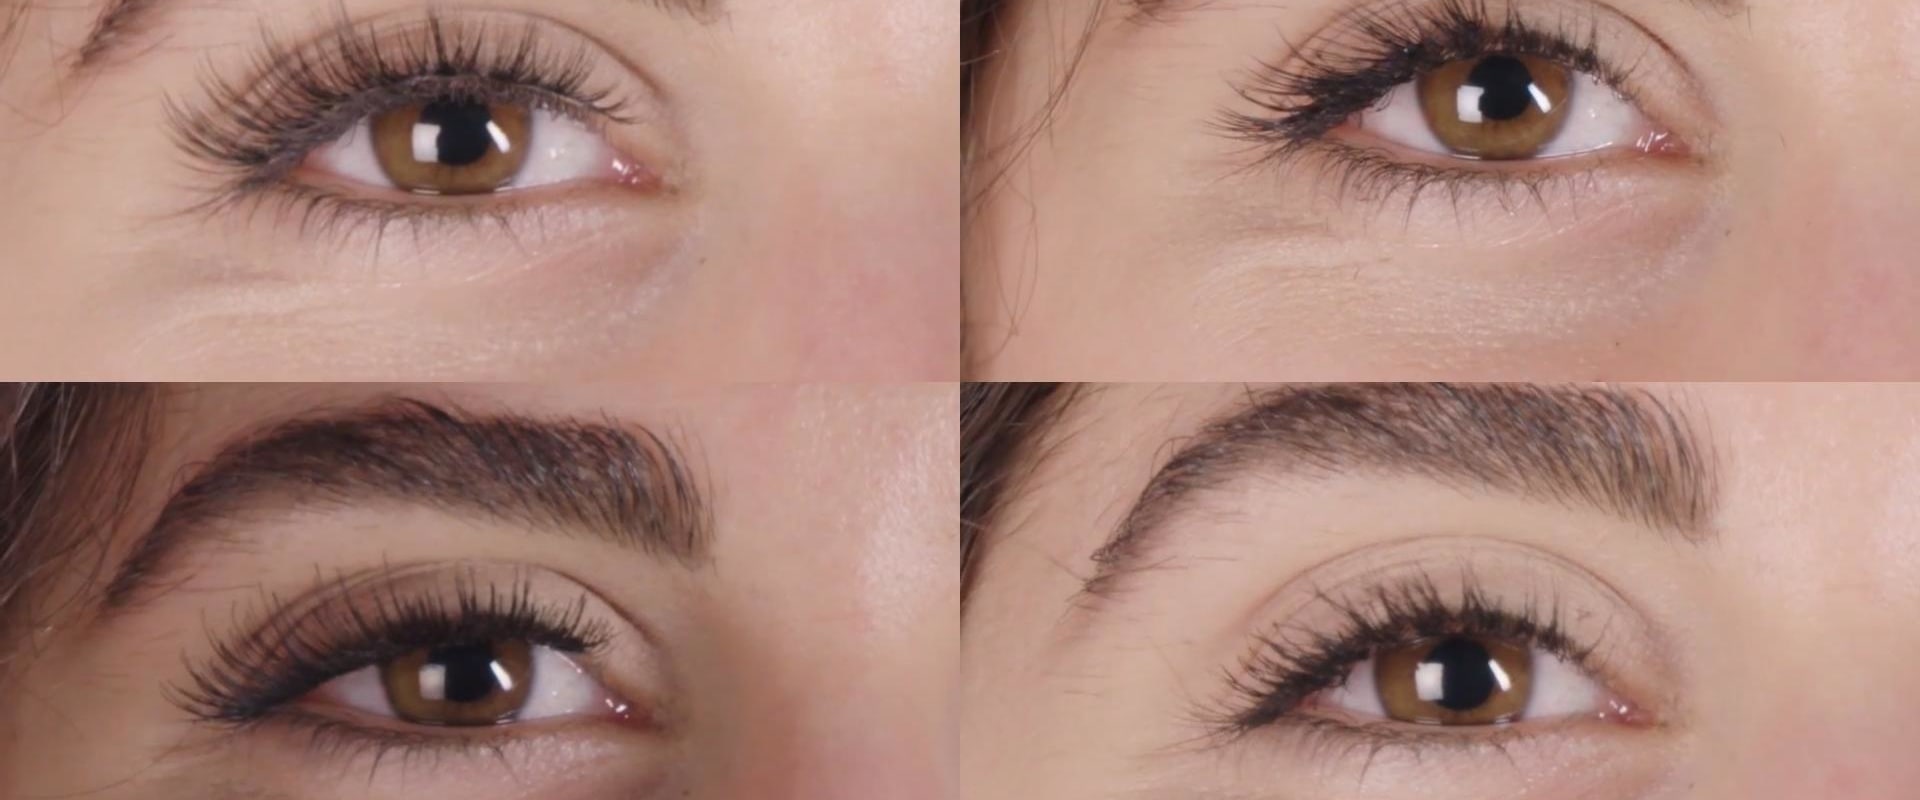 Can Eyelash Extensions Ruin Your Natural Lashes?